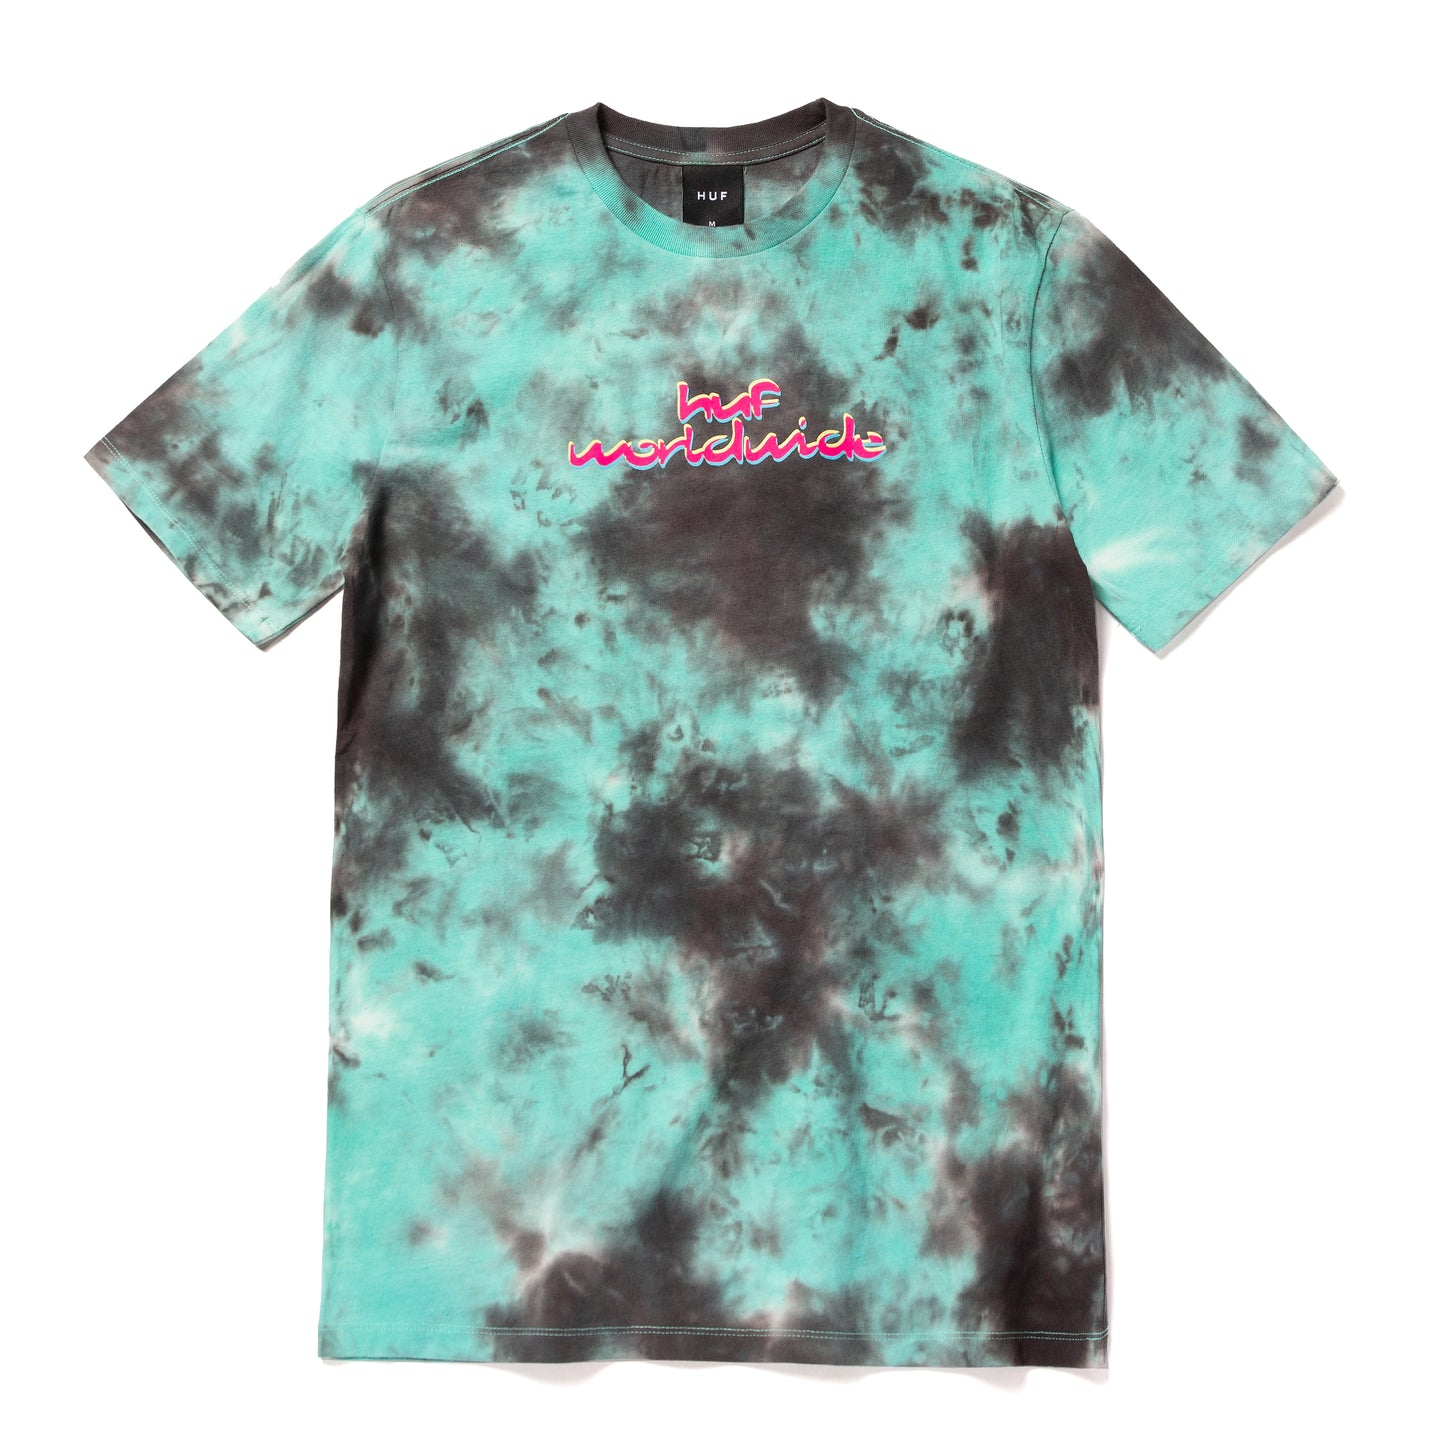 HUF CHEMISTRY S/S TEE - TEAL freeshipping - FREESTYLE LLORET